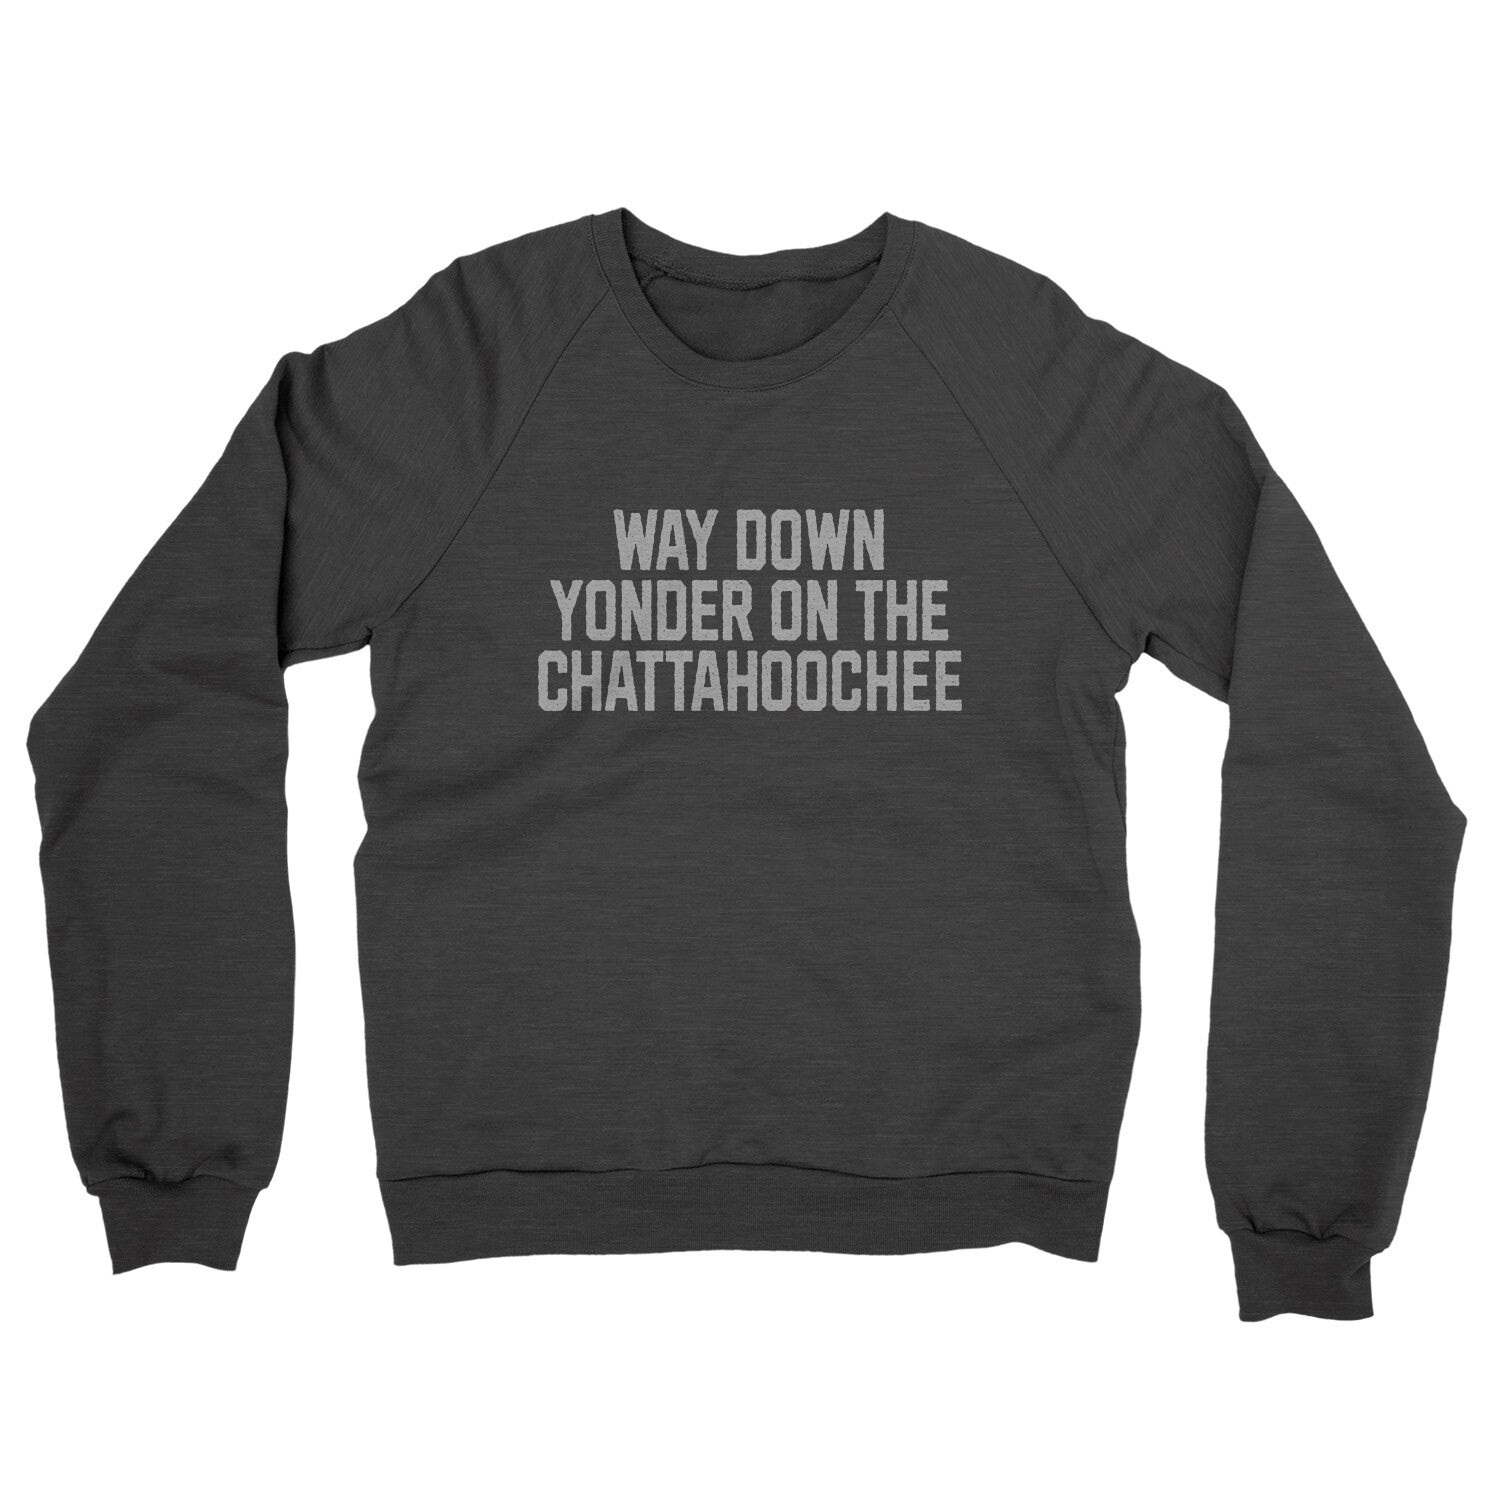 Way Down Yonder on the Chattahoochee in Charcoal Heather Color